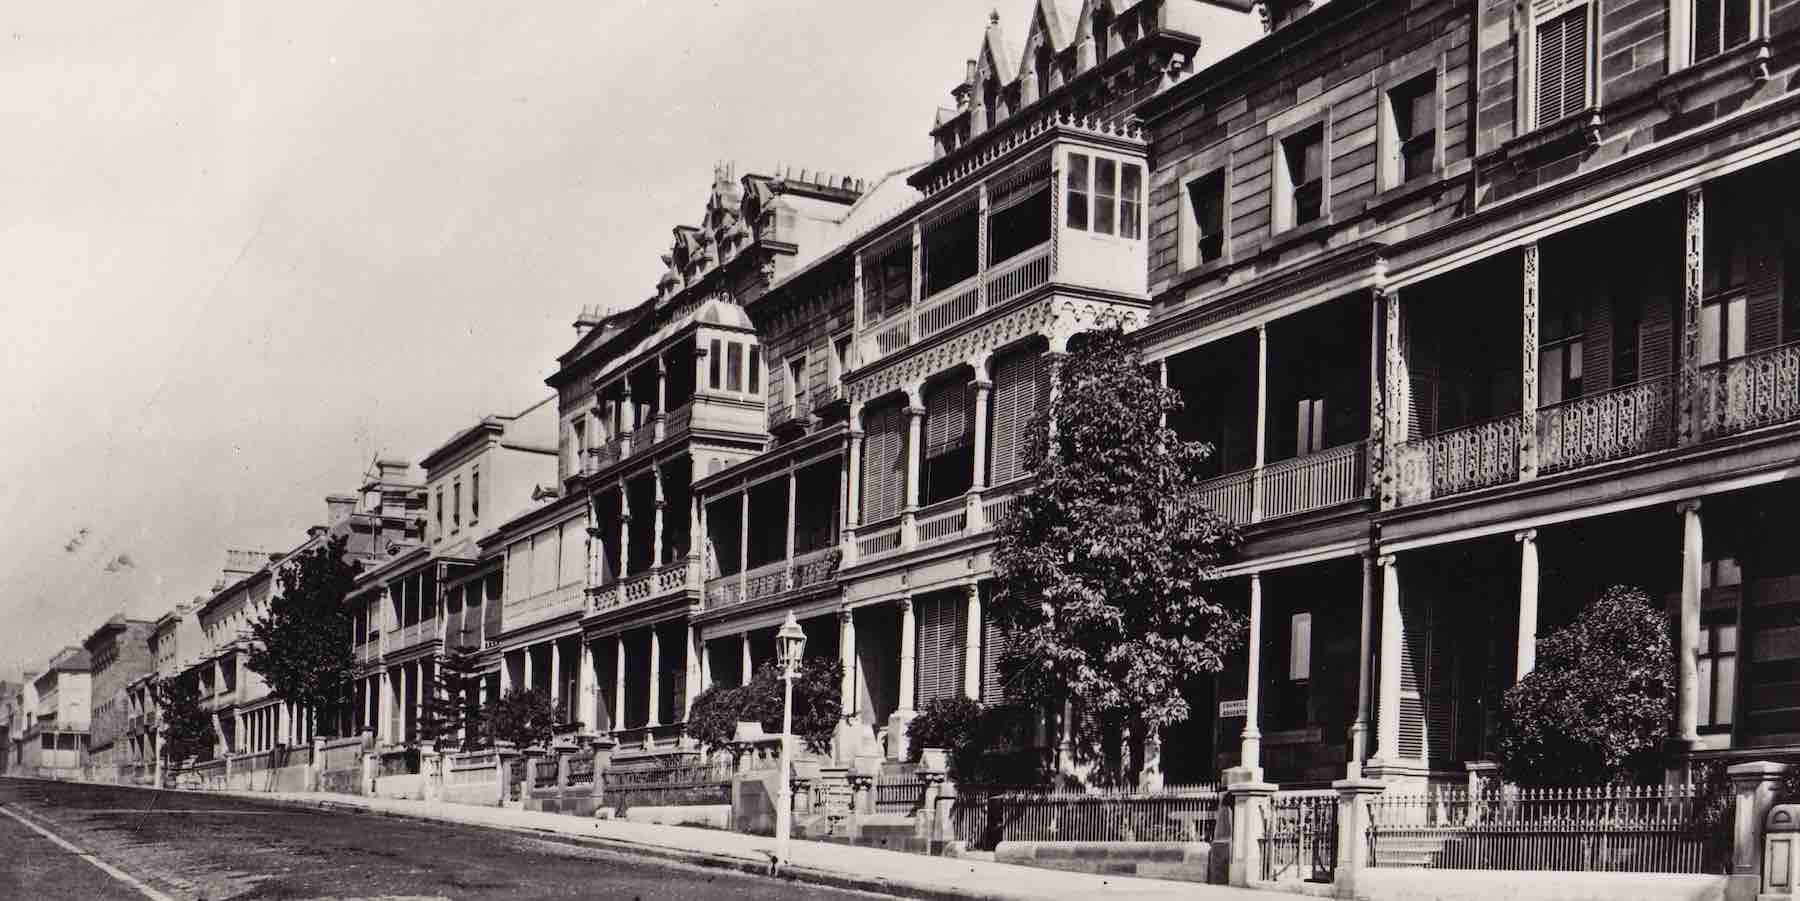 A row of townhouses along Macquarie Street circa 1870, including History House.